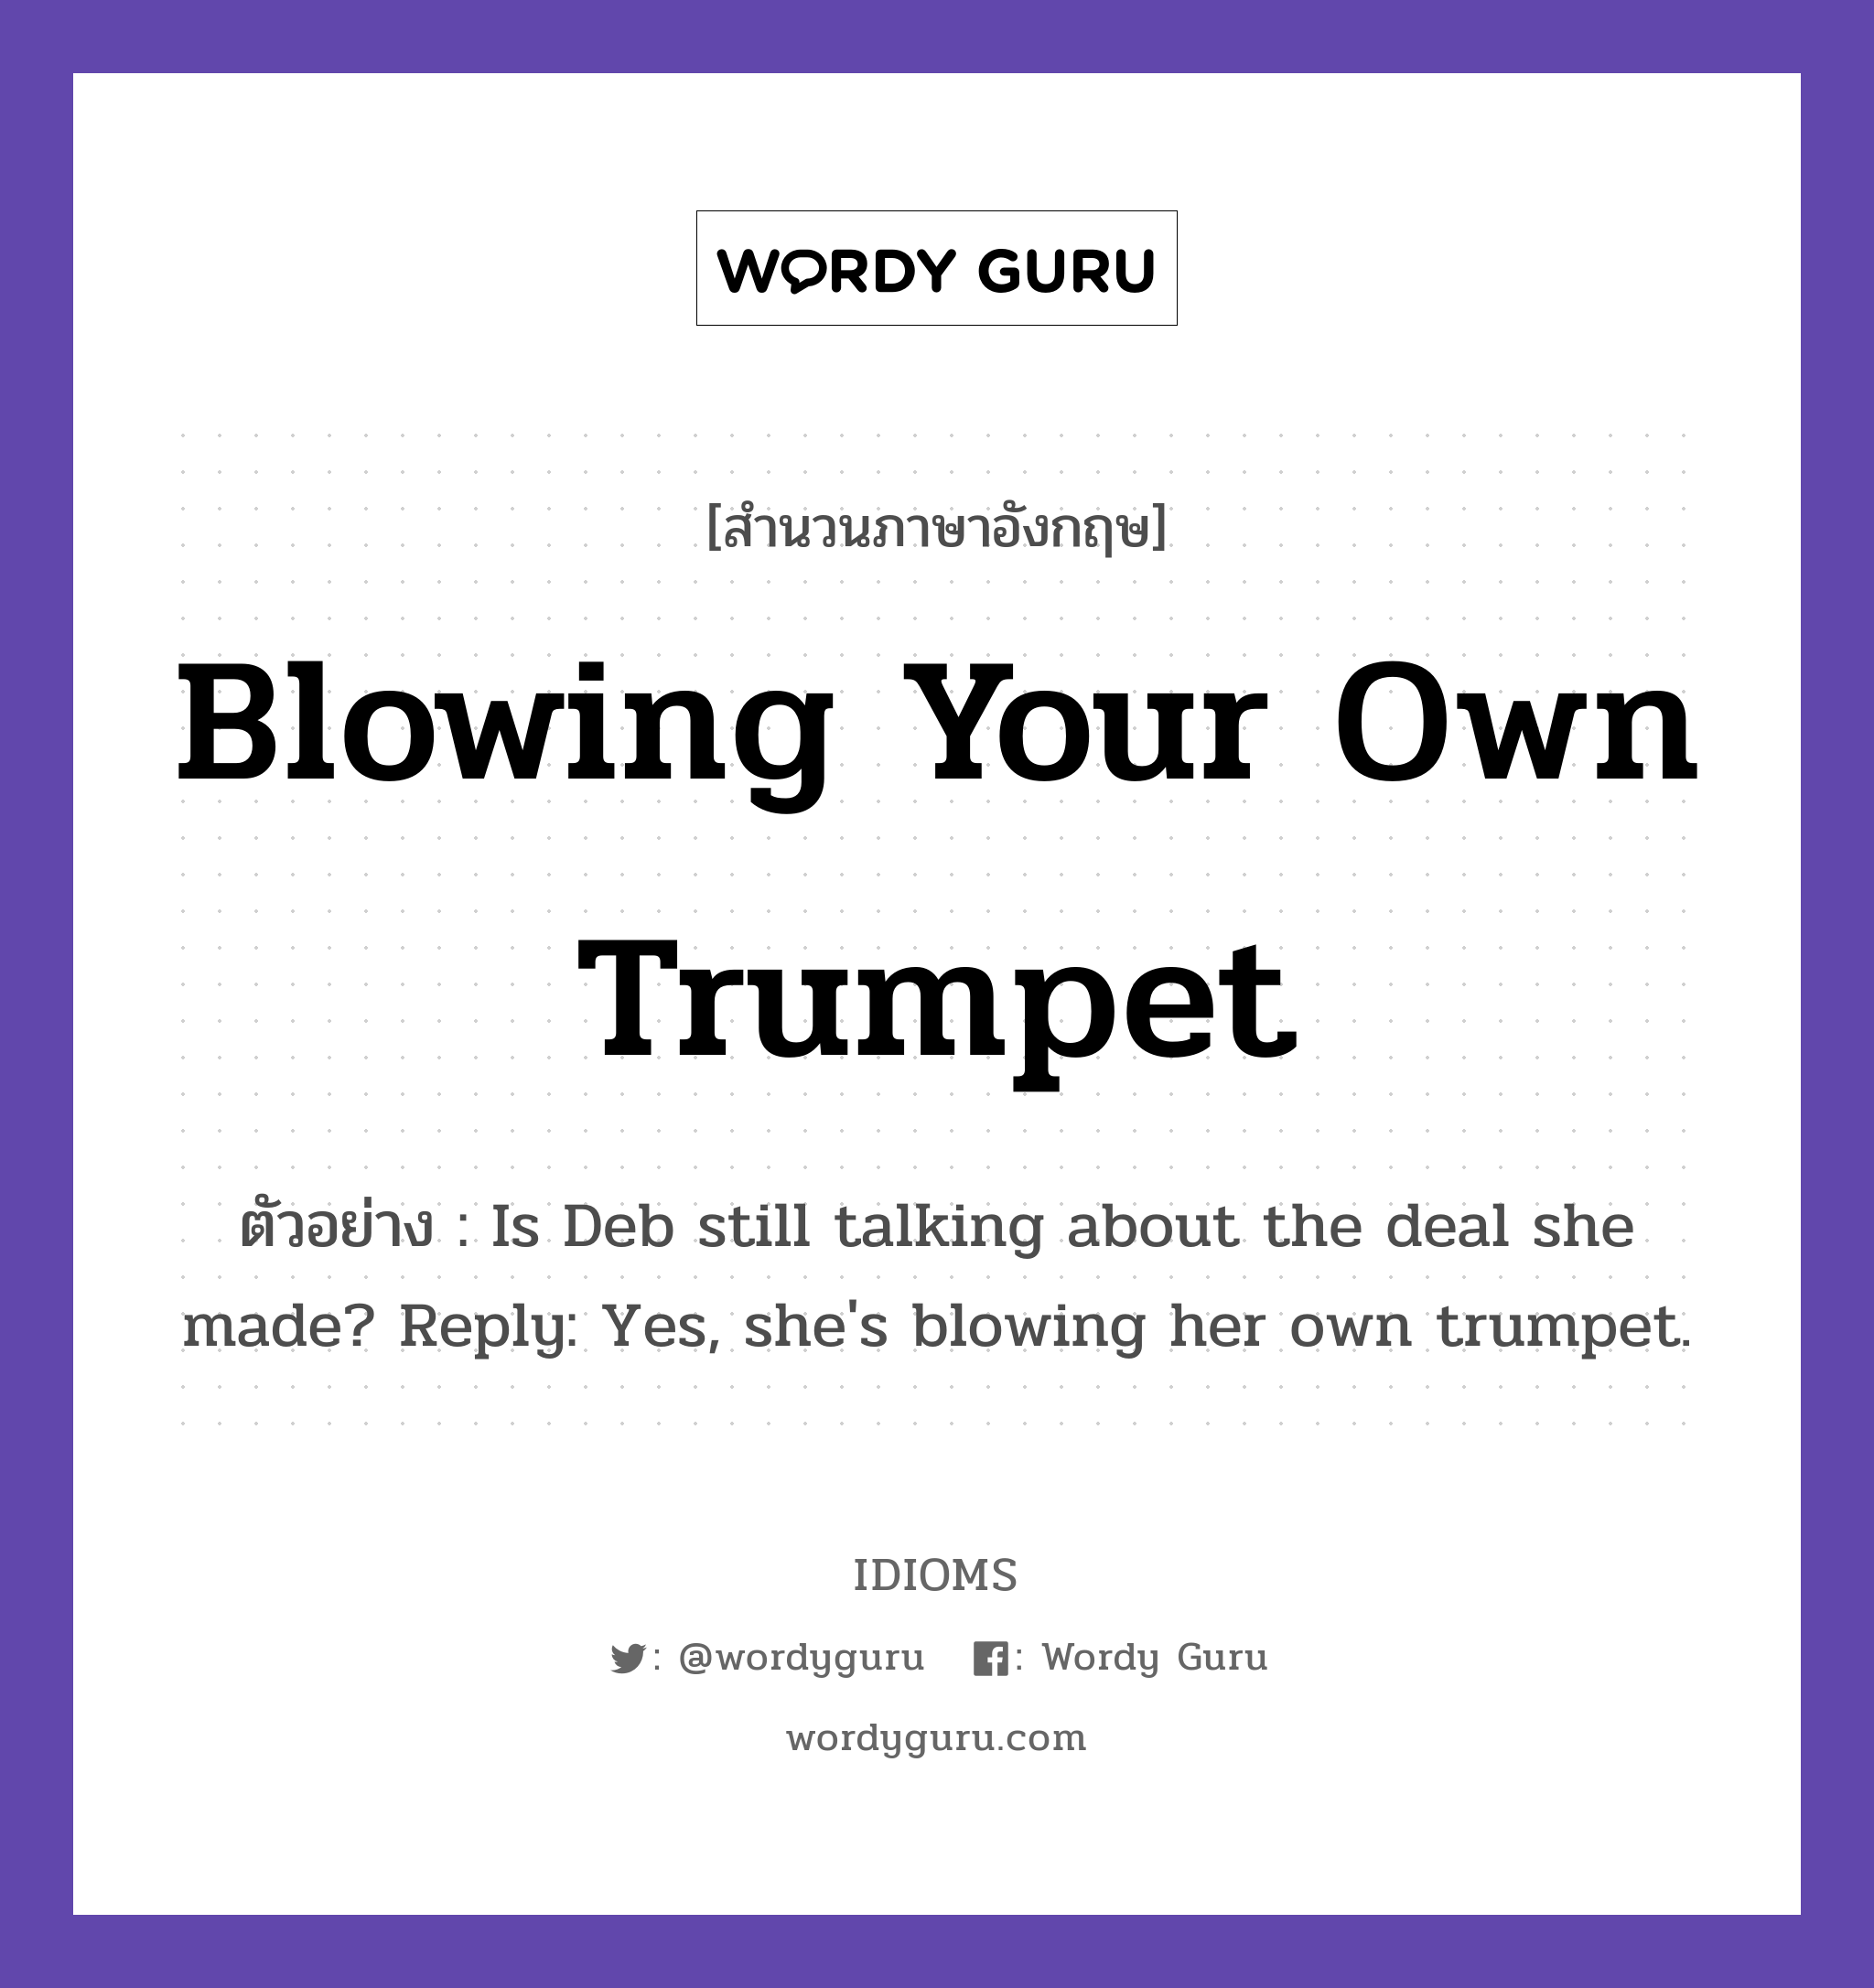 Blowing Your Own Trumpet แปลว่า?, สำนวนภาษาอังกฤษ Blowing Your Own Trumpet ตัวอย่าง Is Deb still talking about the deal she made? Reply: Yes, she's blowing her own trumpet.